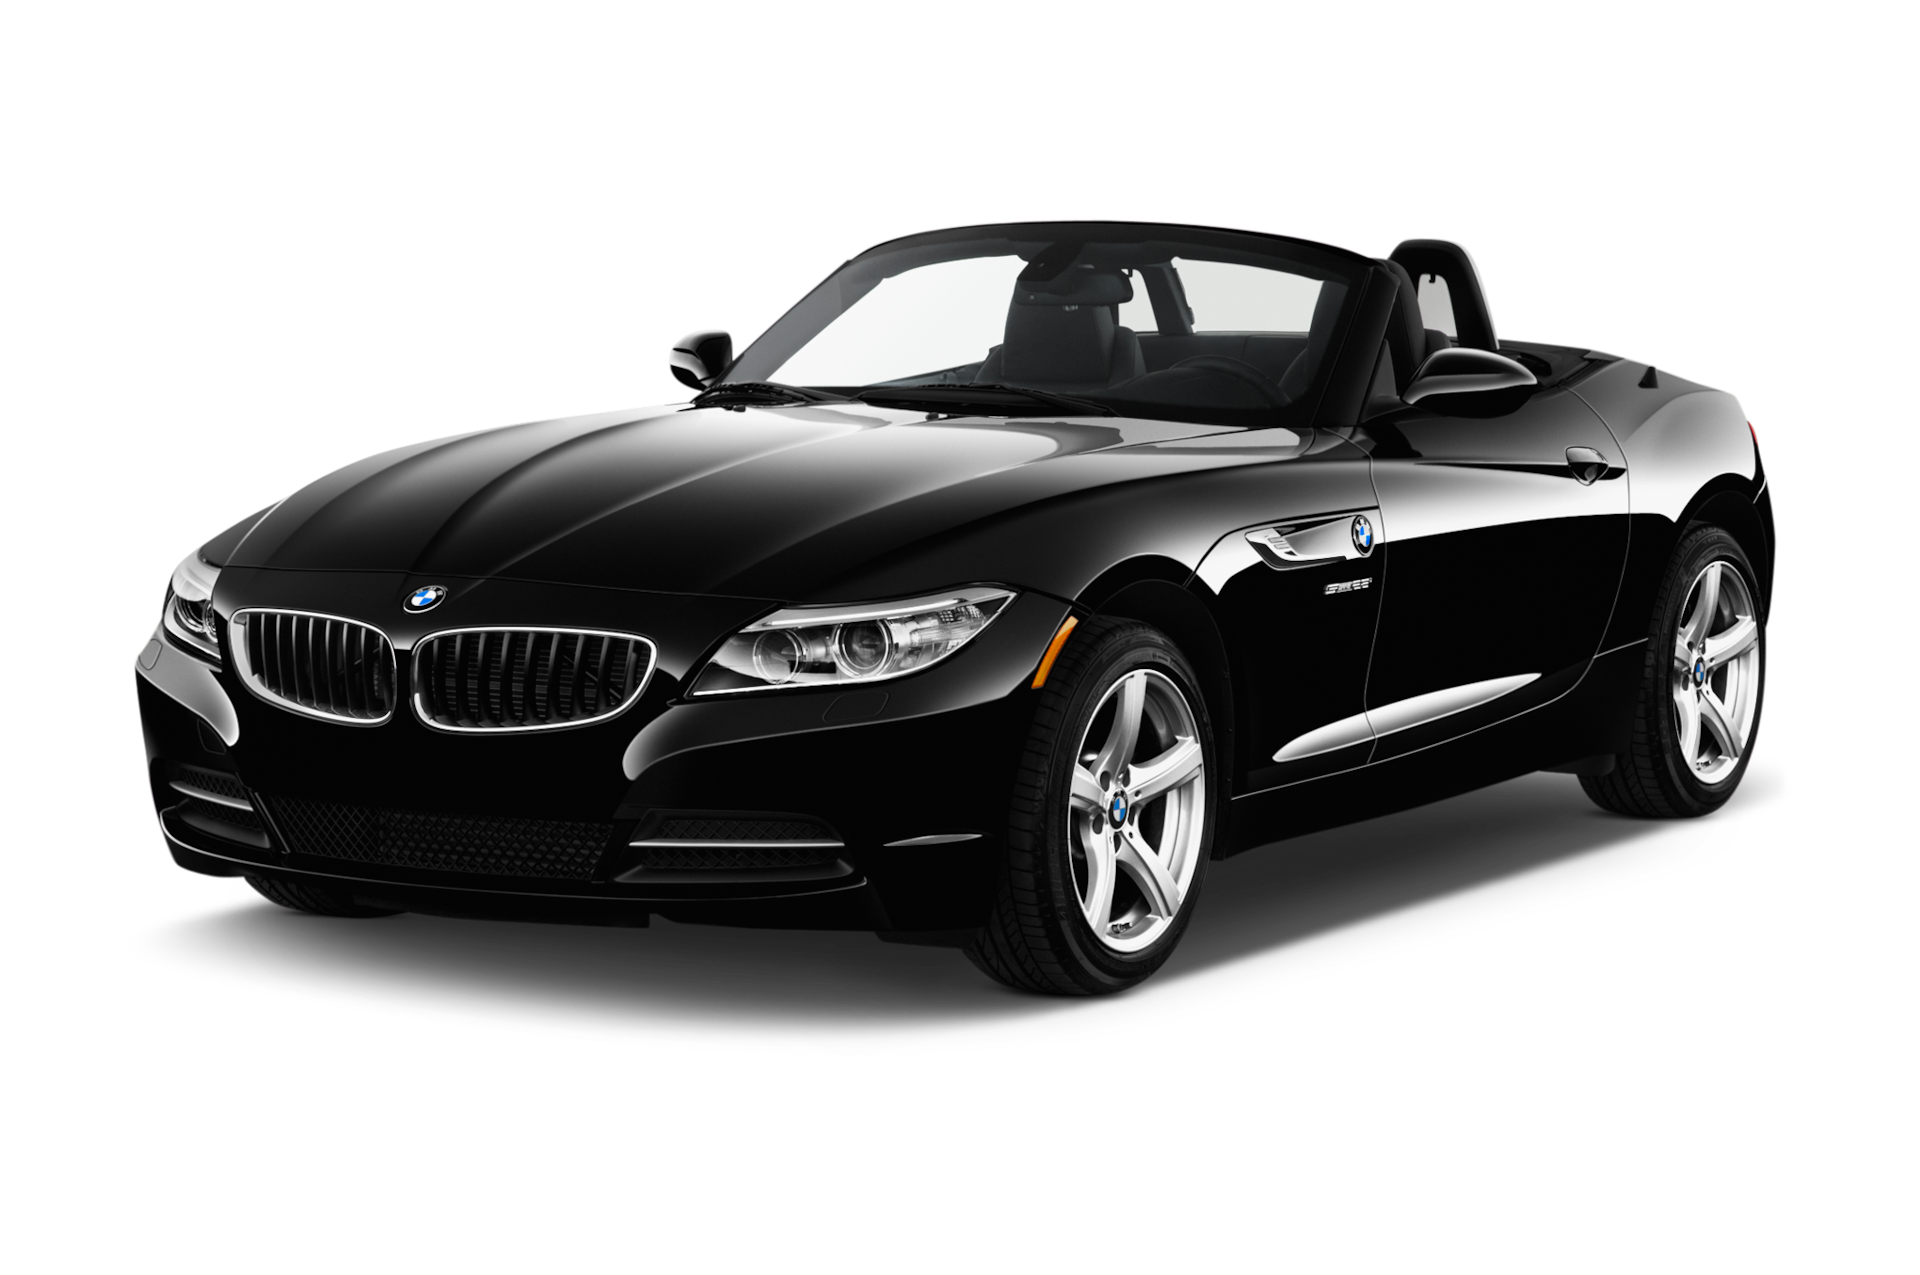 2016 BMW Z4 Prices, Reviews, and Photos - MotorTrend